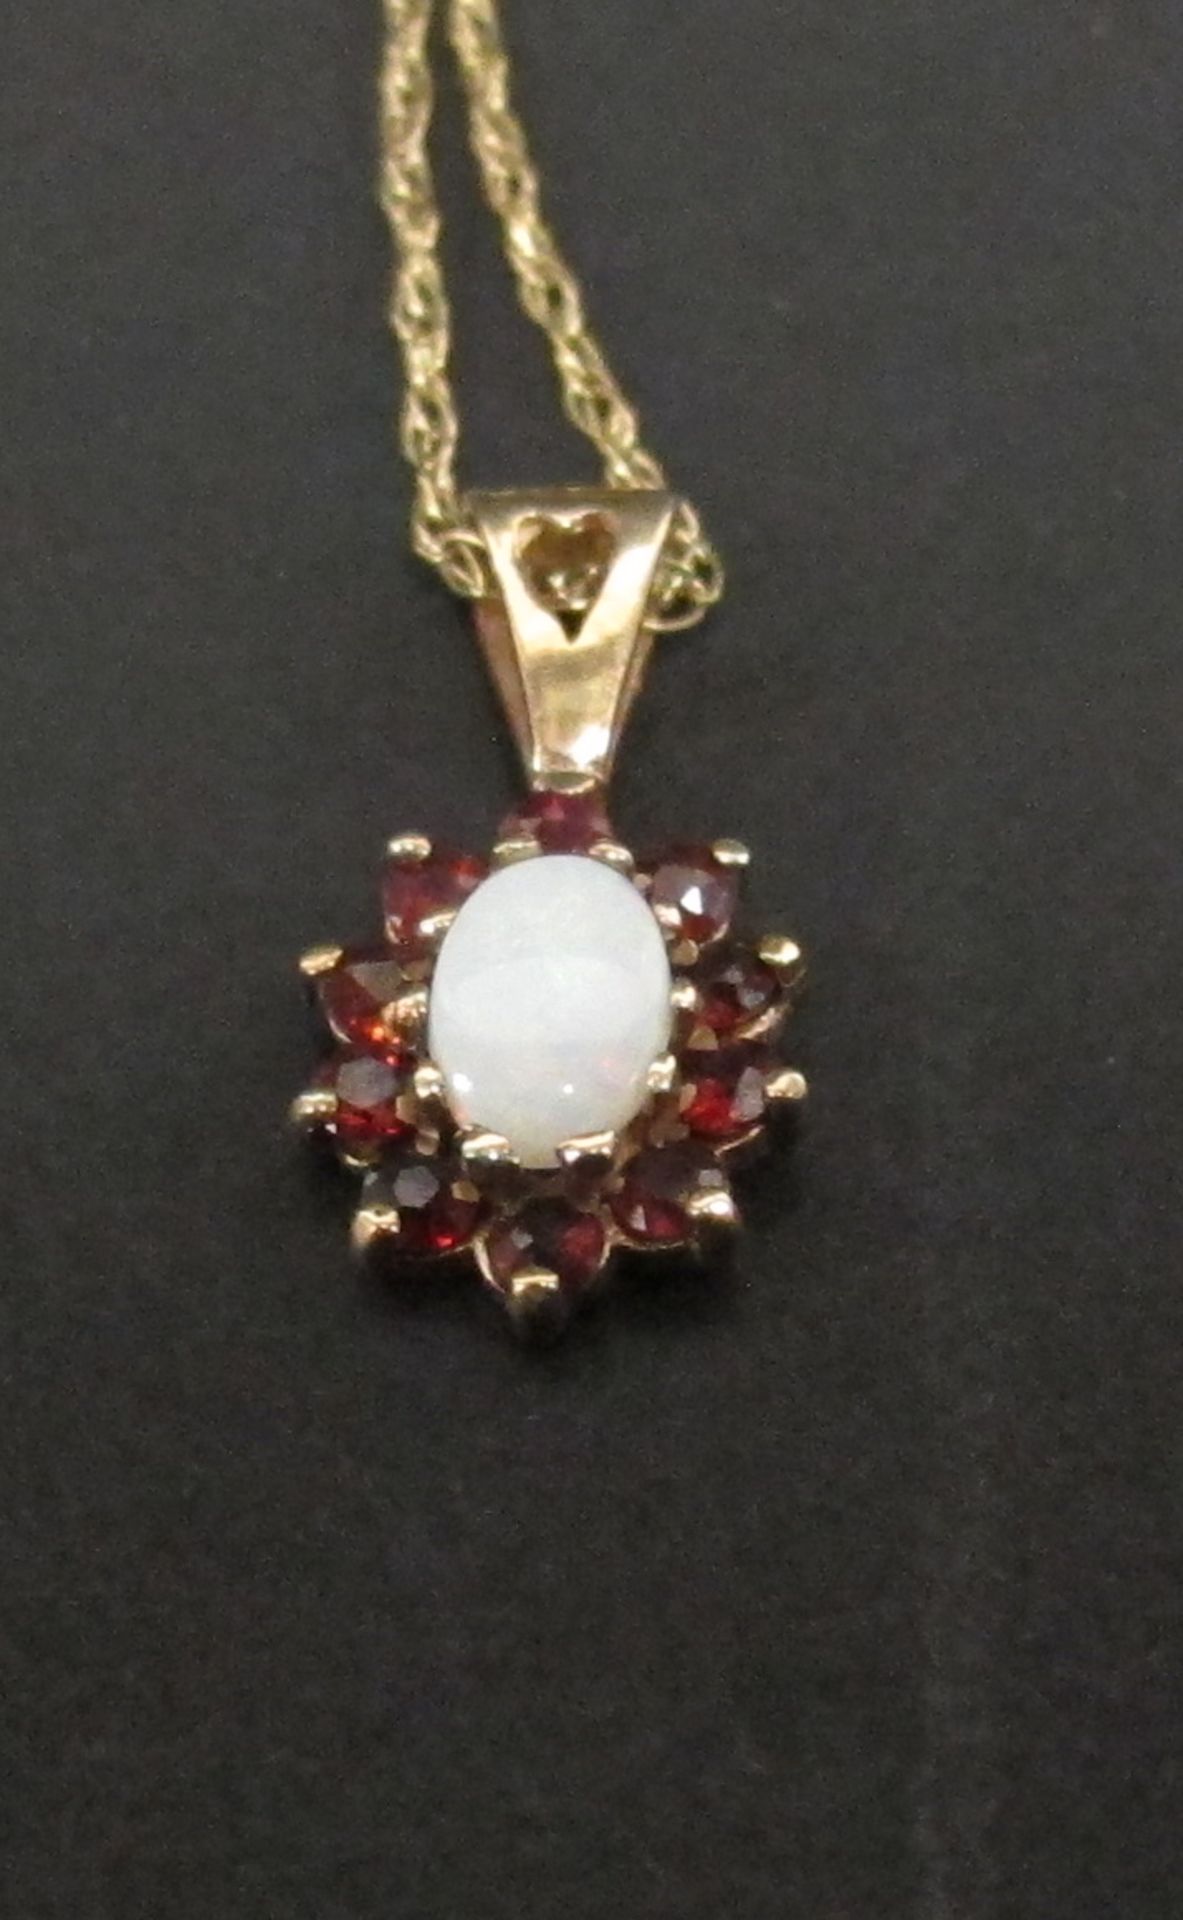 9ct gold, opal and garnet pendant on 9ct gold chain (est £30-£60) - Image 3 of 3